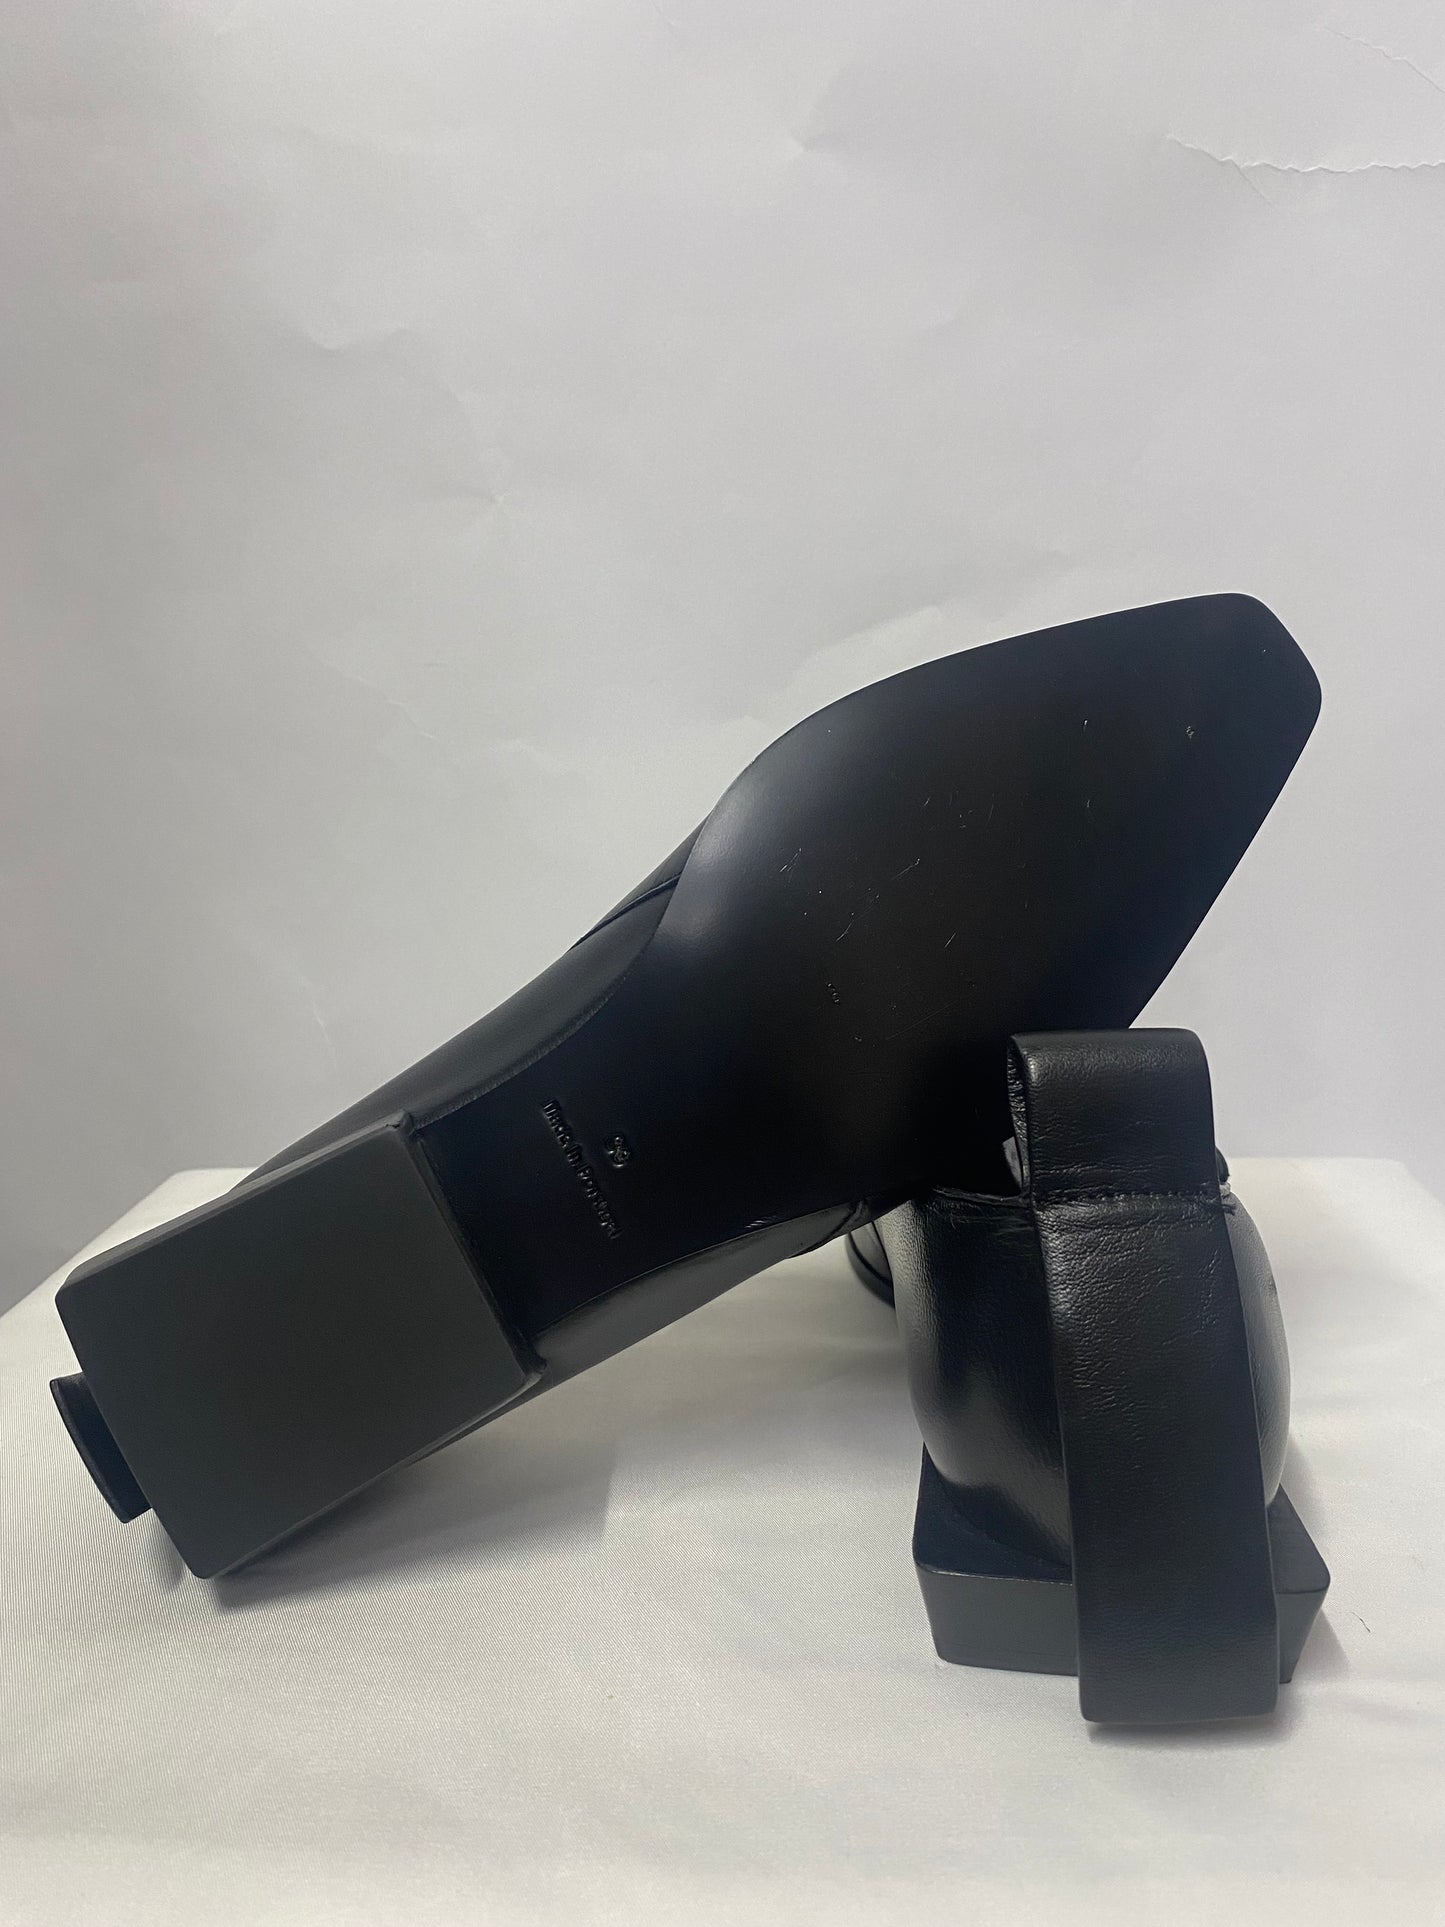 COS Black Leather Flat Slip On Shoes 6